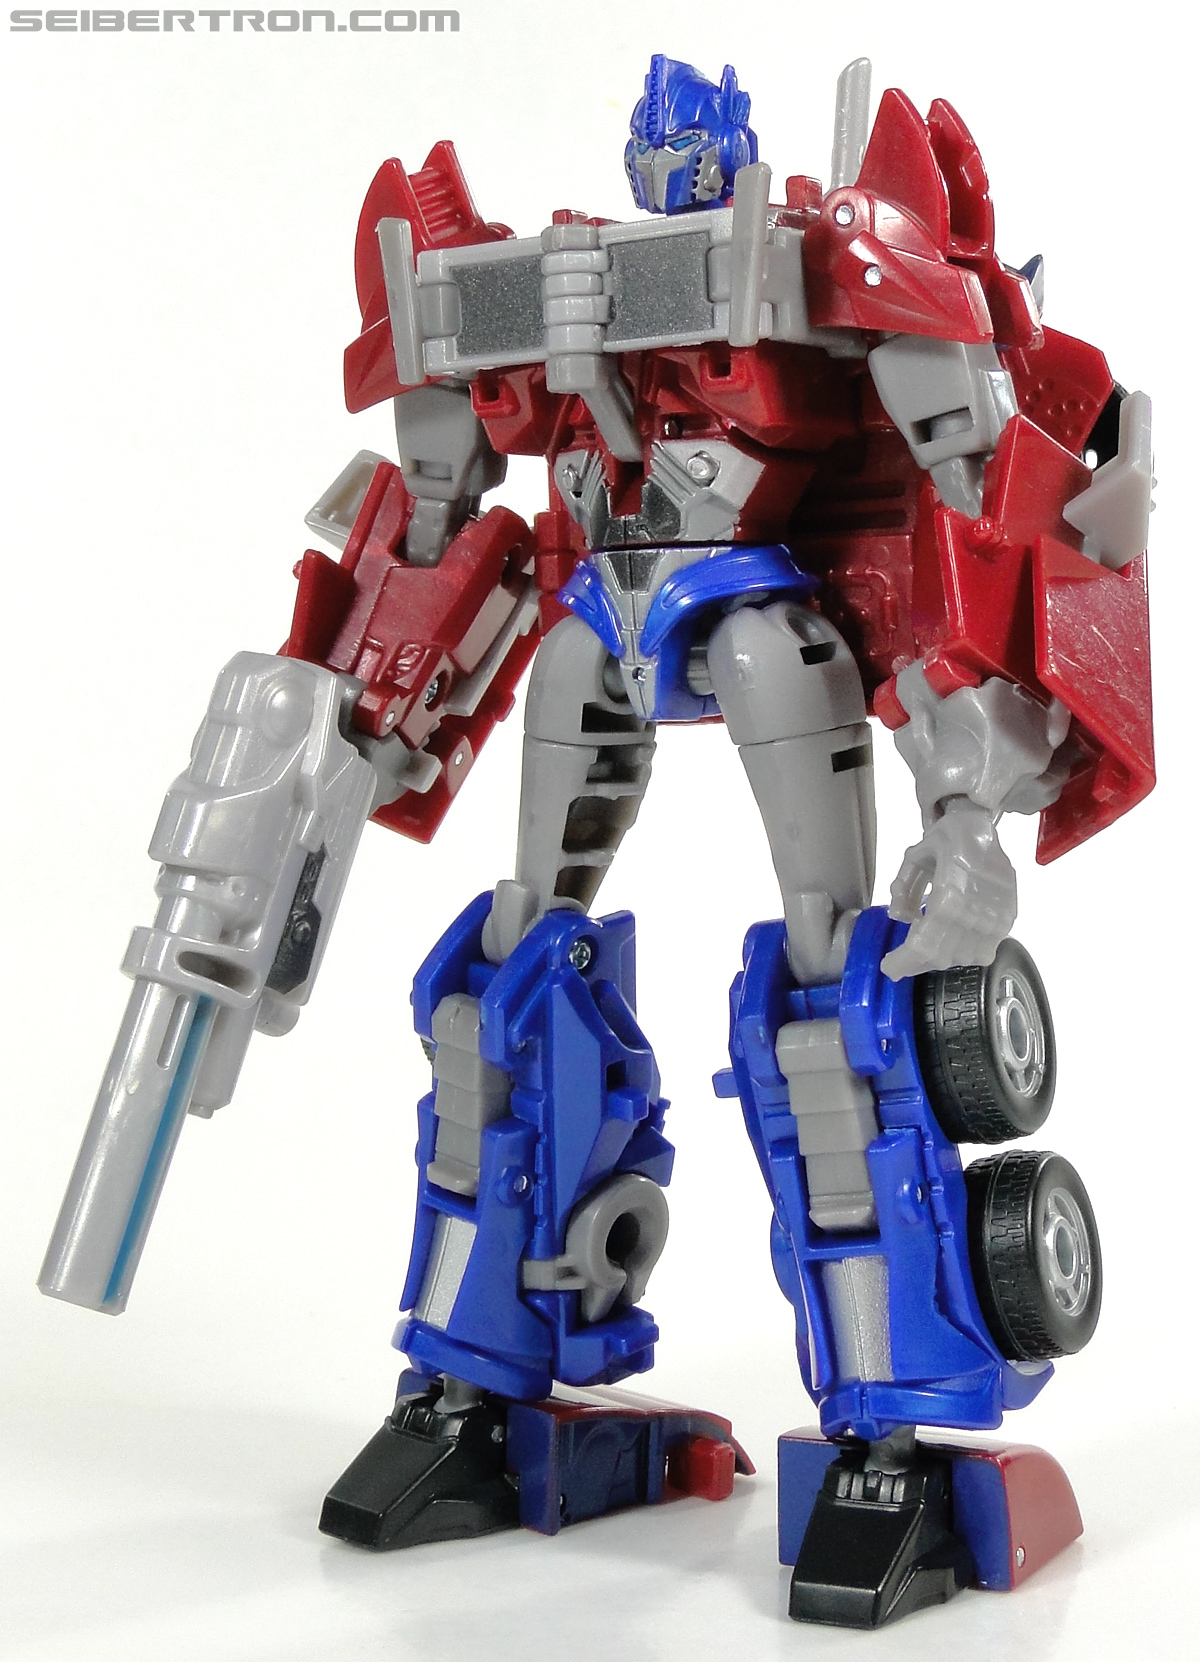 Transformers Prime: First Edition Optimus Prime (Image #89 of 170)